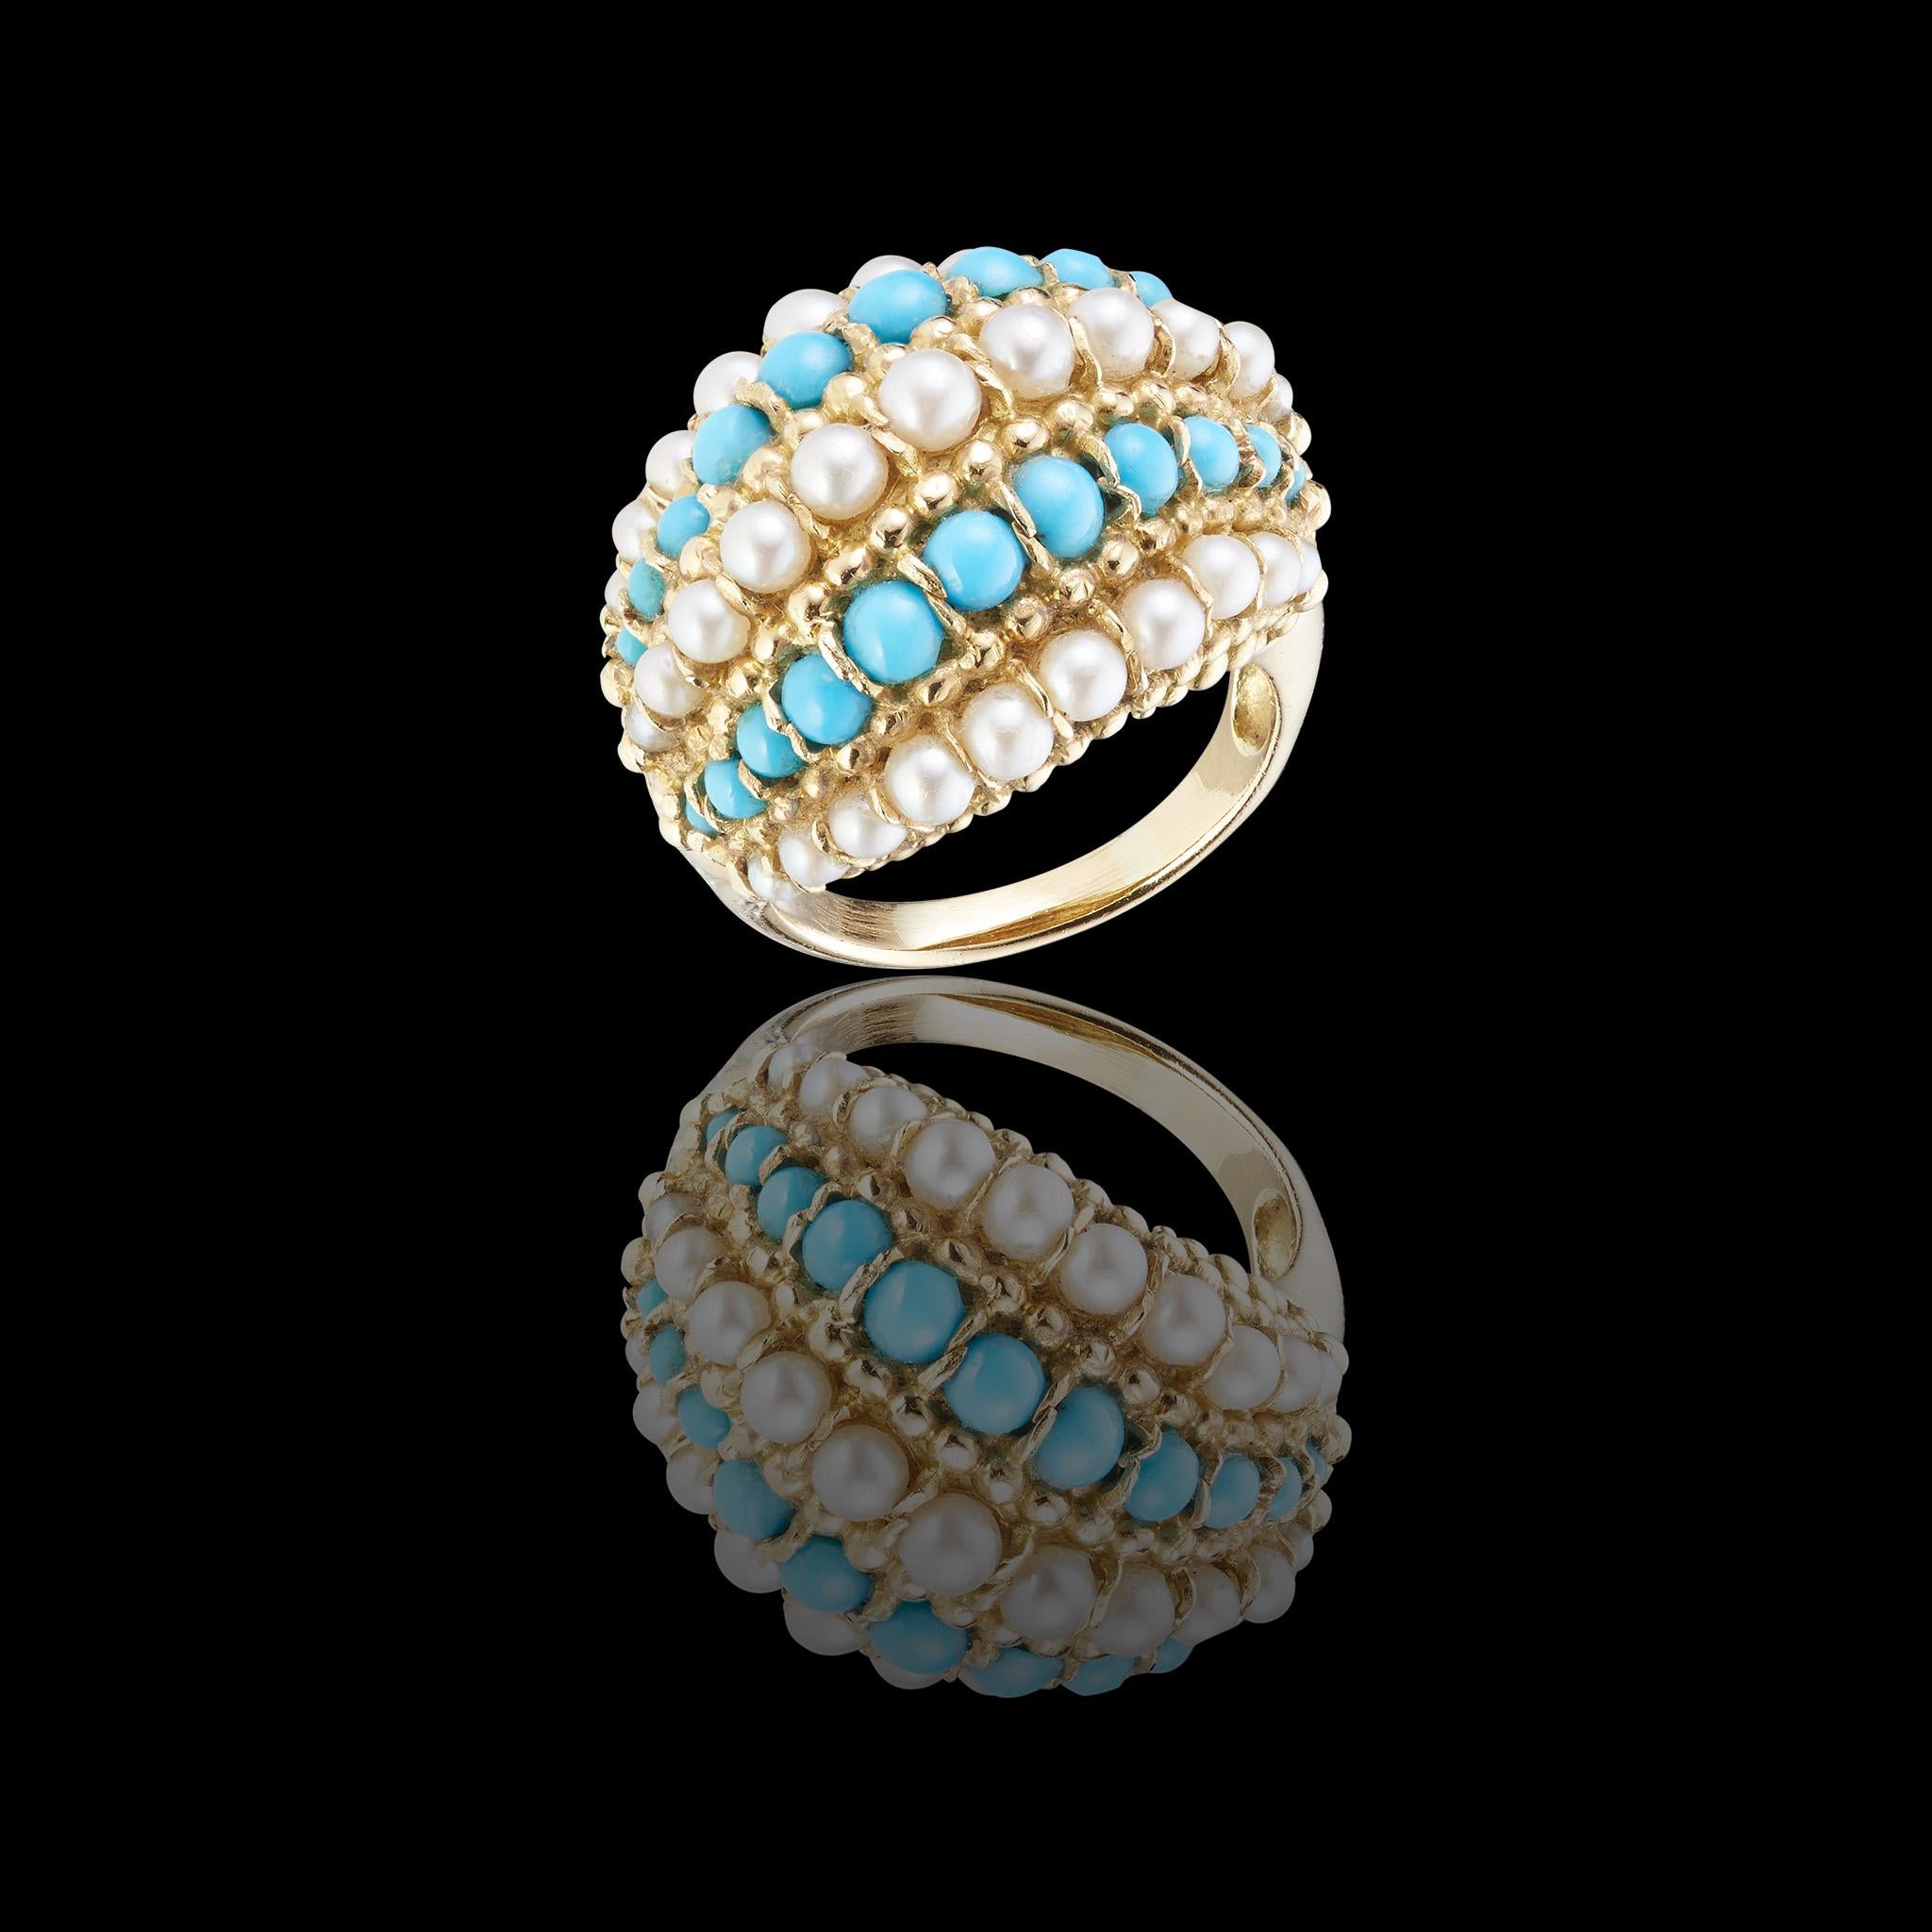 Women's or Men's Van Cleef & Arpels 1960s Turquoise and Pearl Ring For Sale